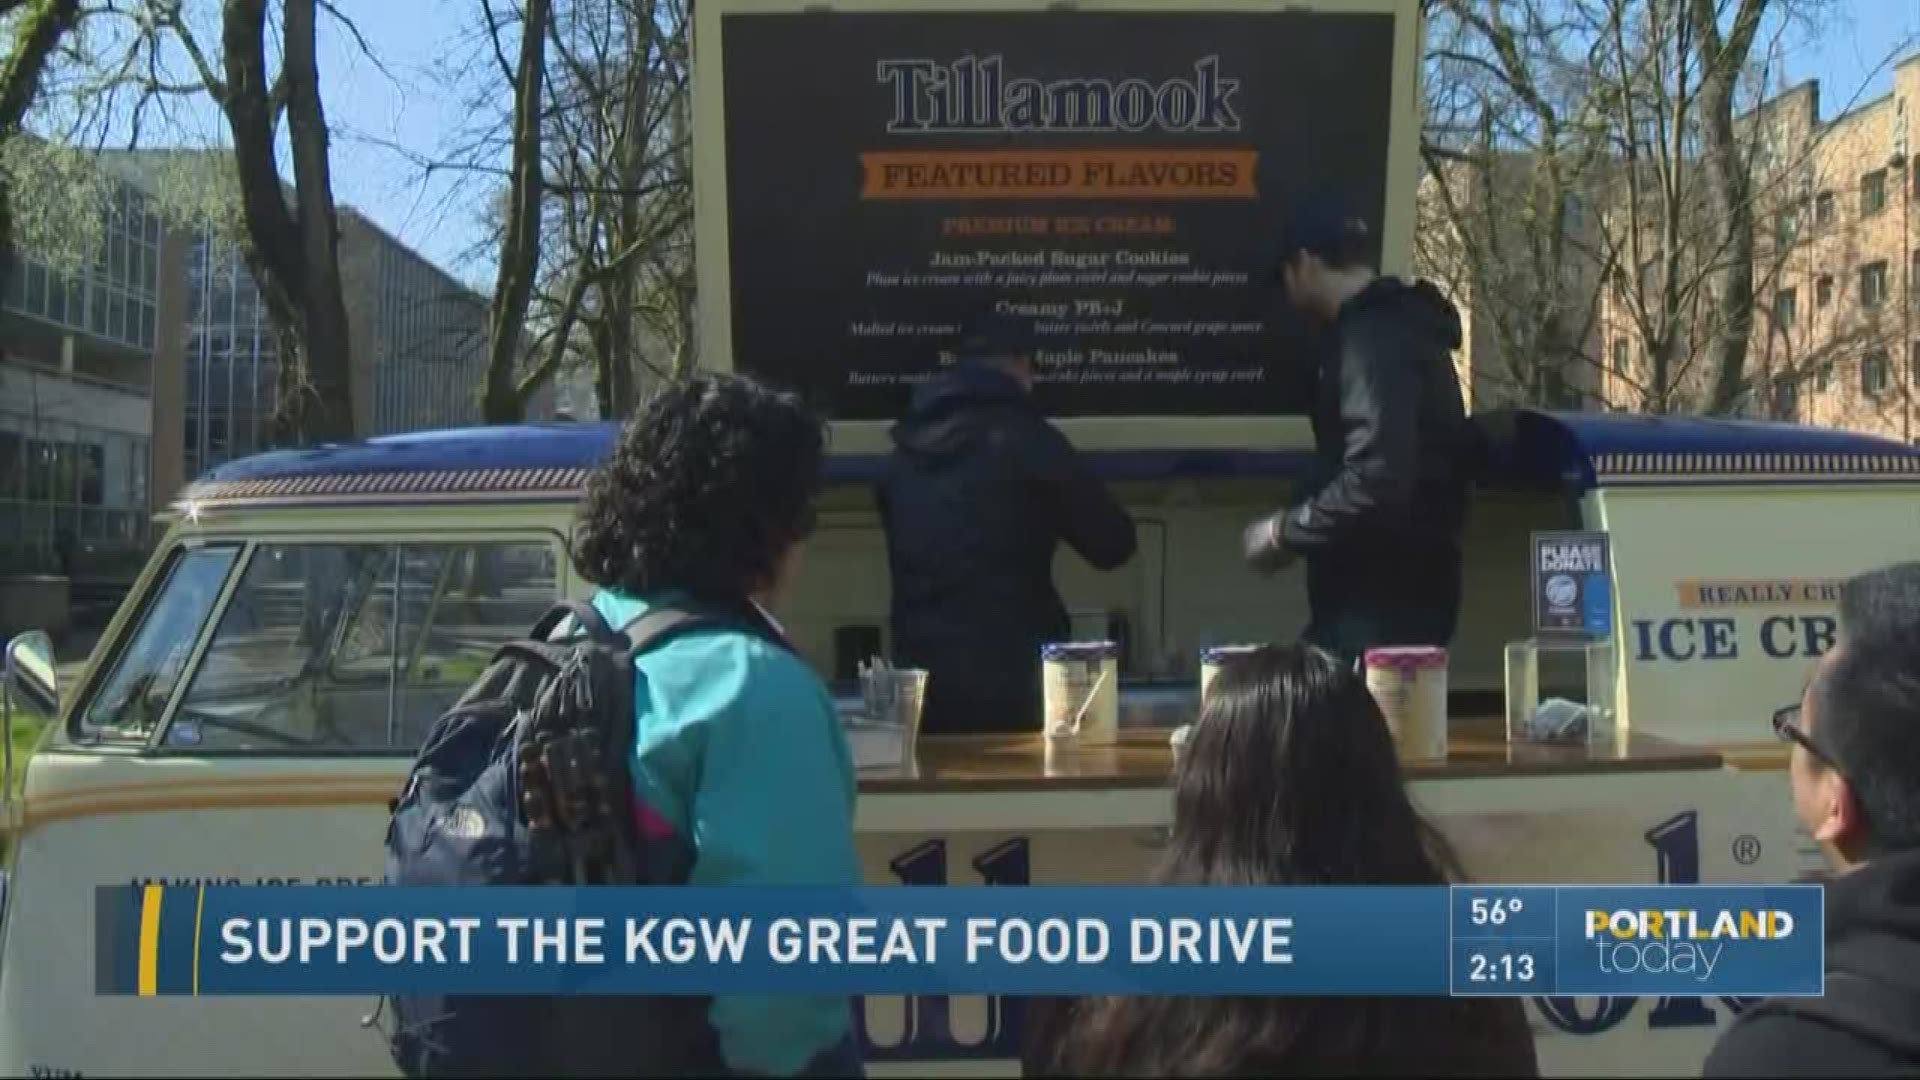 Drew Carney learning more about how buying Tillamook will support the KGW Great Food Drive.